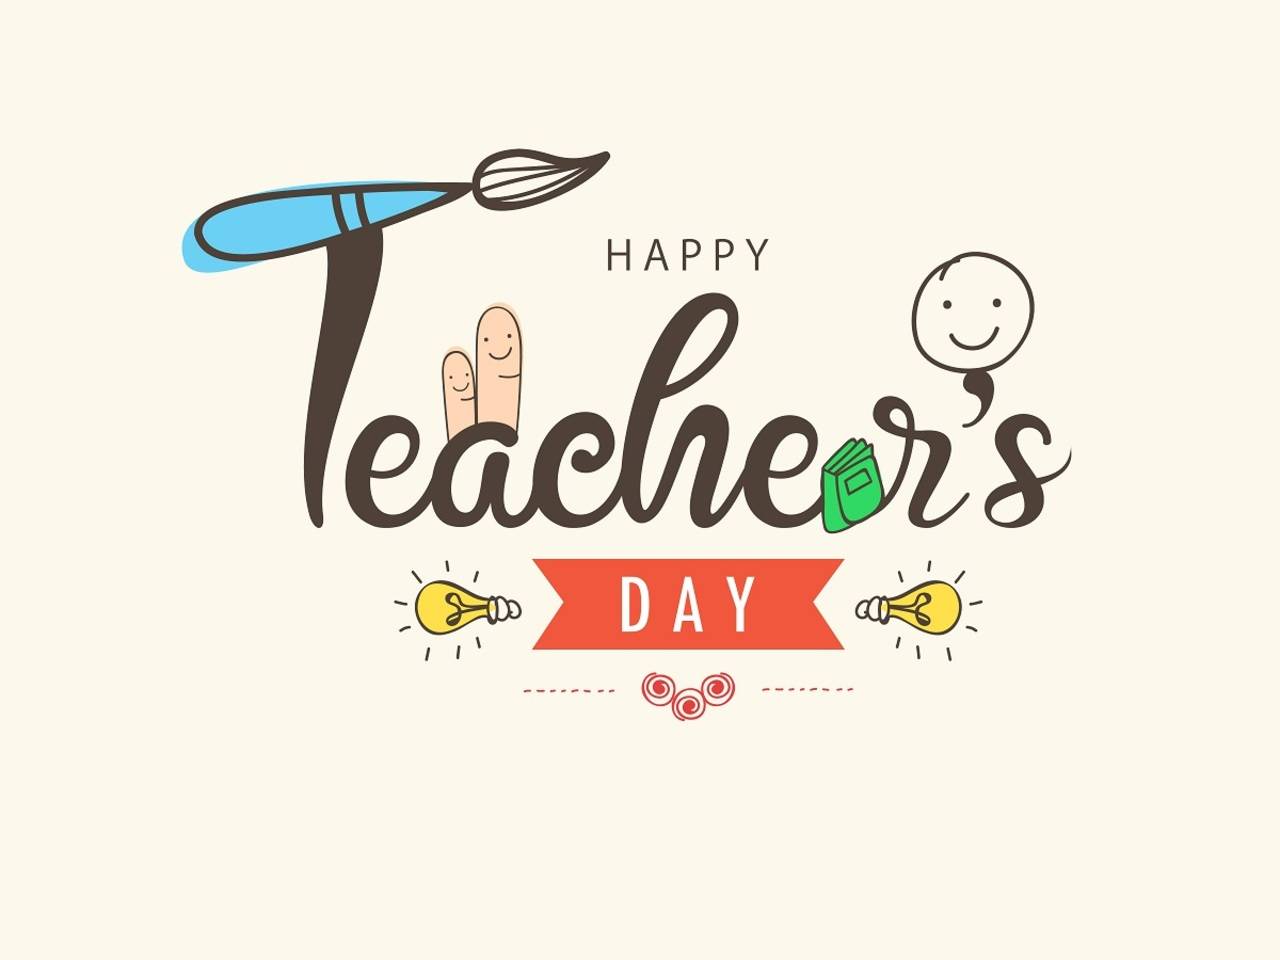 Teachers' Day Quotes: Inspirational quotes, messages and thoughts ...